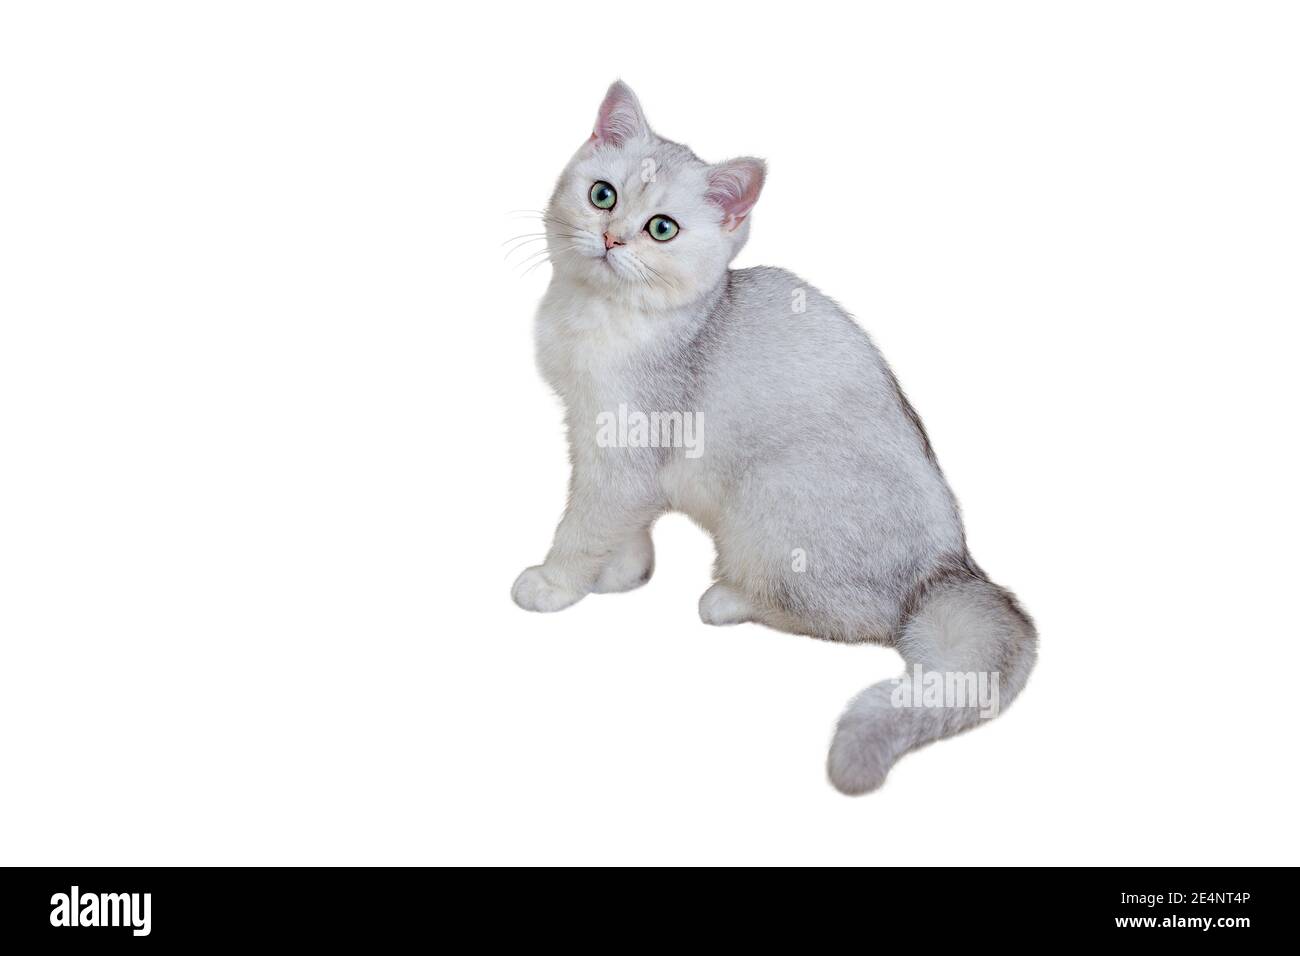 Beautiful gray kitten five months old British breed sits on a white background. Stock Photo